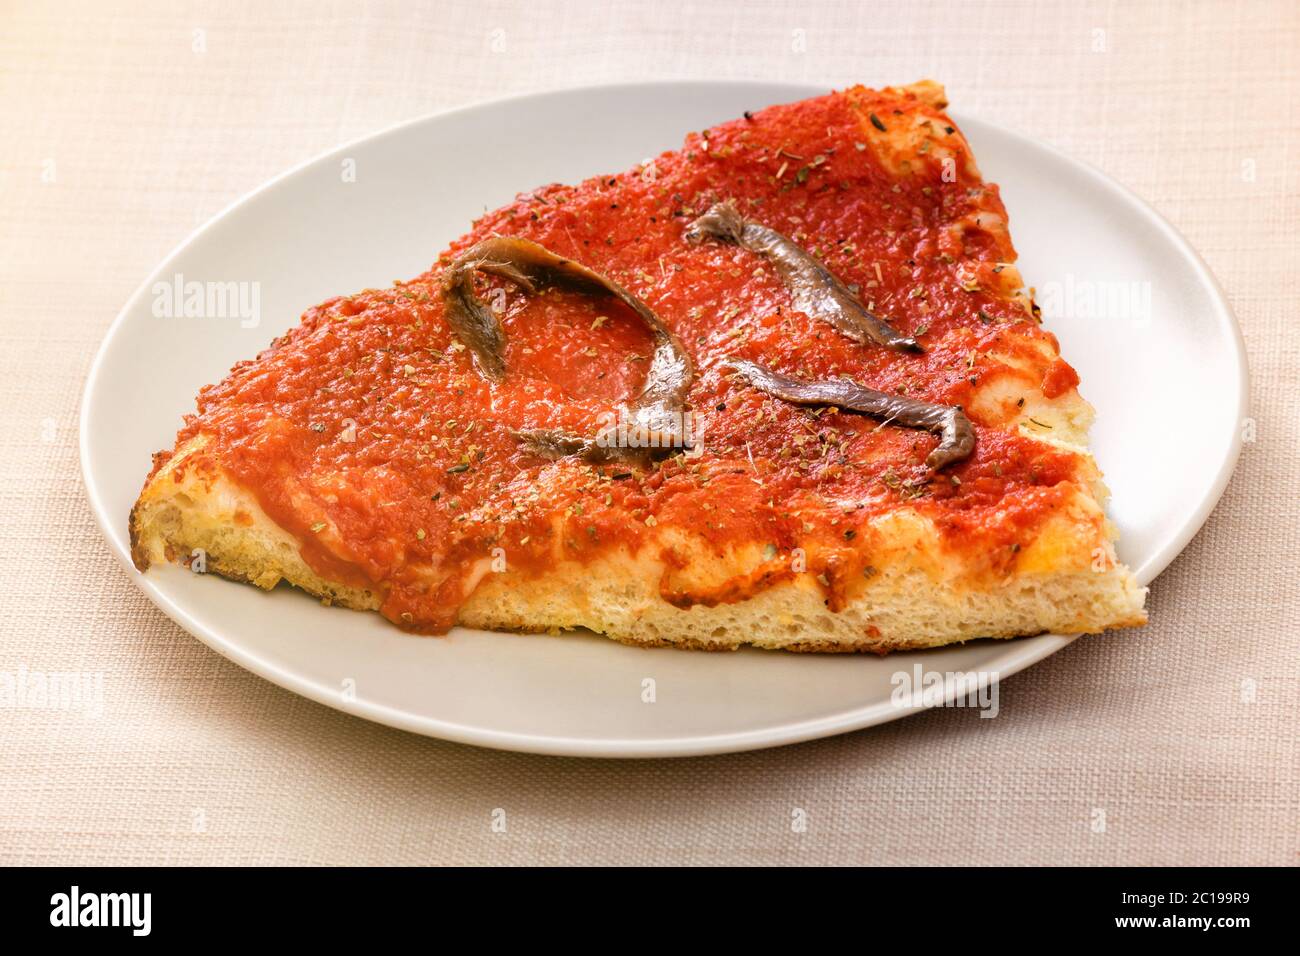 Single slice of Marinara pizza with anchovy topping on tomato paste in close up served on a generic white plate Stock Photo